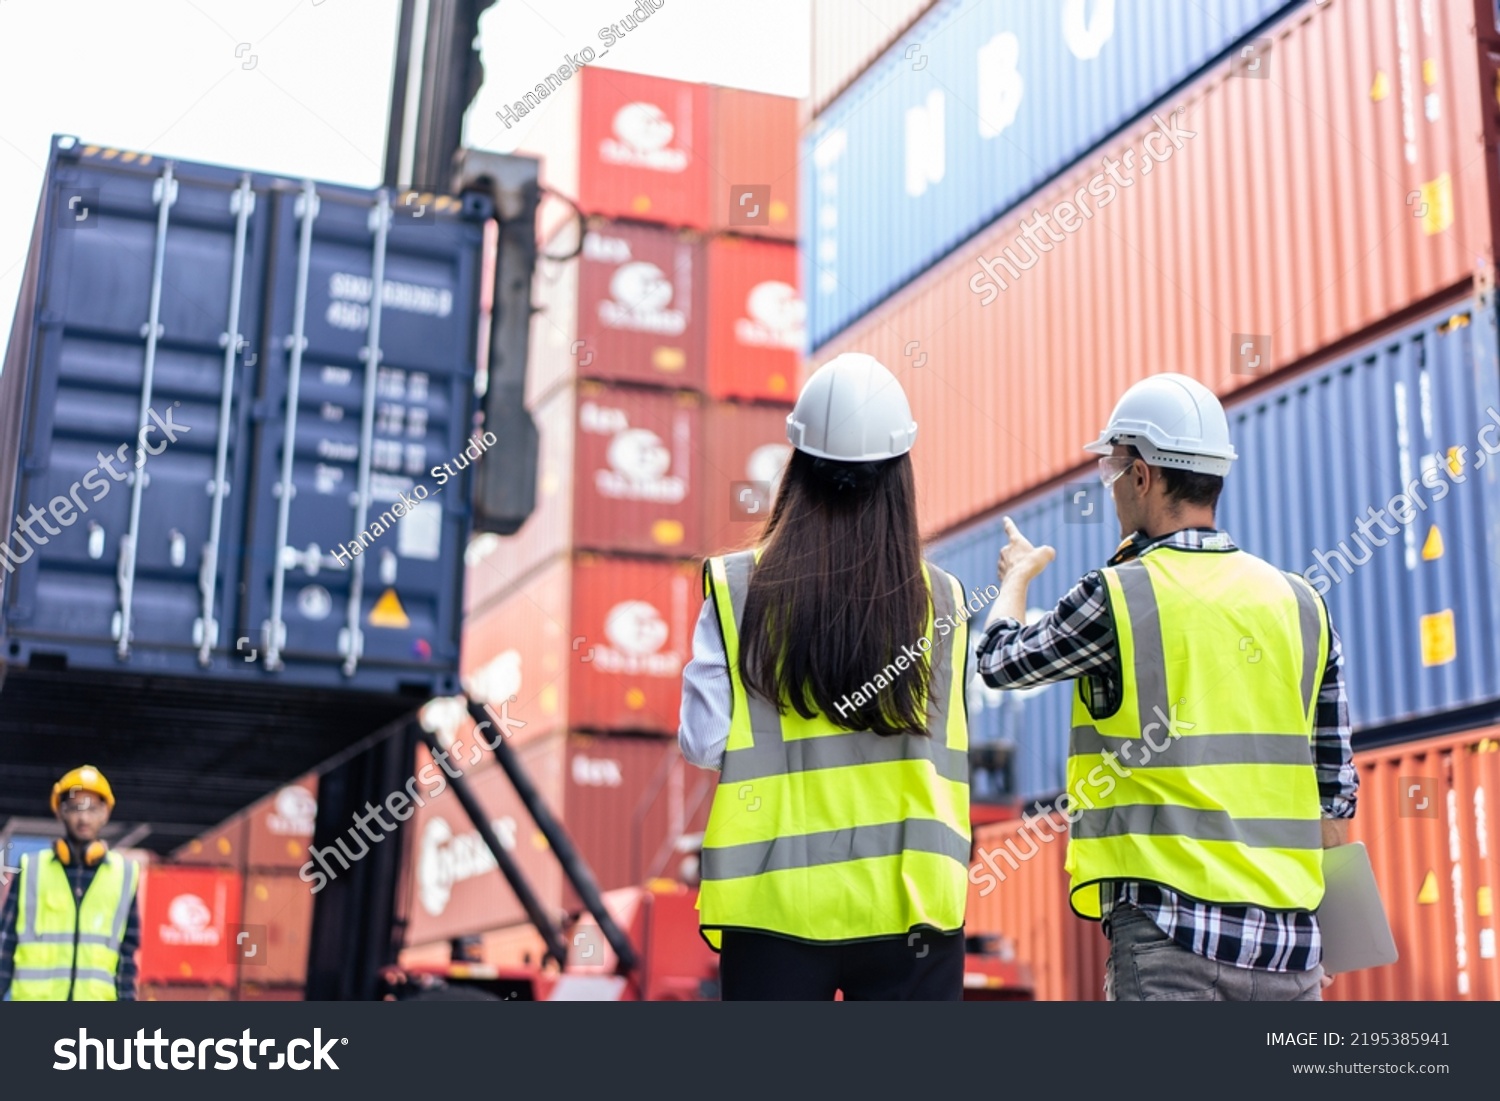 Caucasian business man and woman worker working in container terminal. Attractive engineer people processes orders and product at warehouse logistic in cargo freight ship for import export in harbor.
 #2195385941